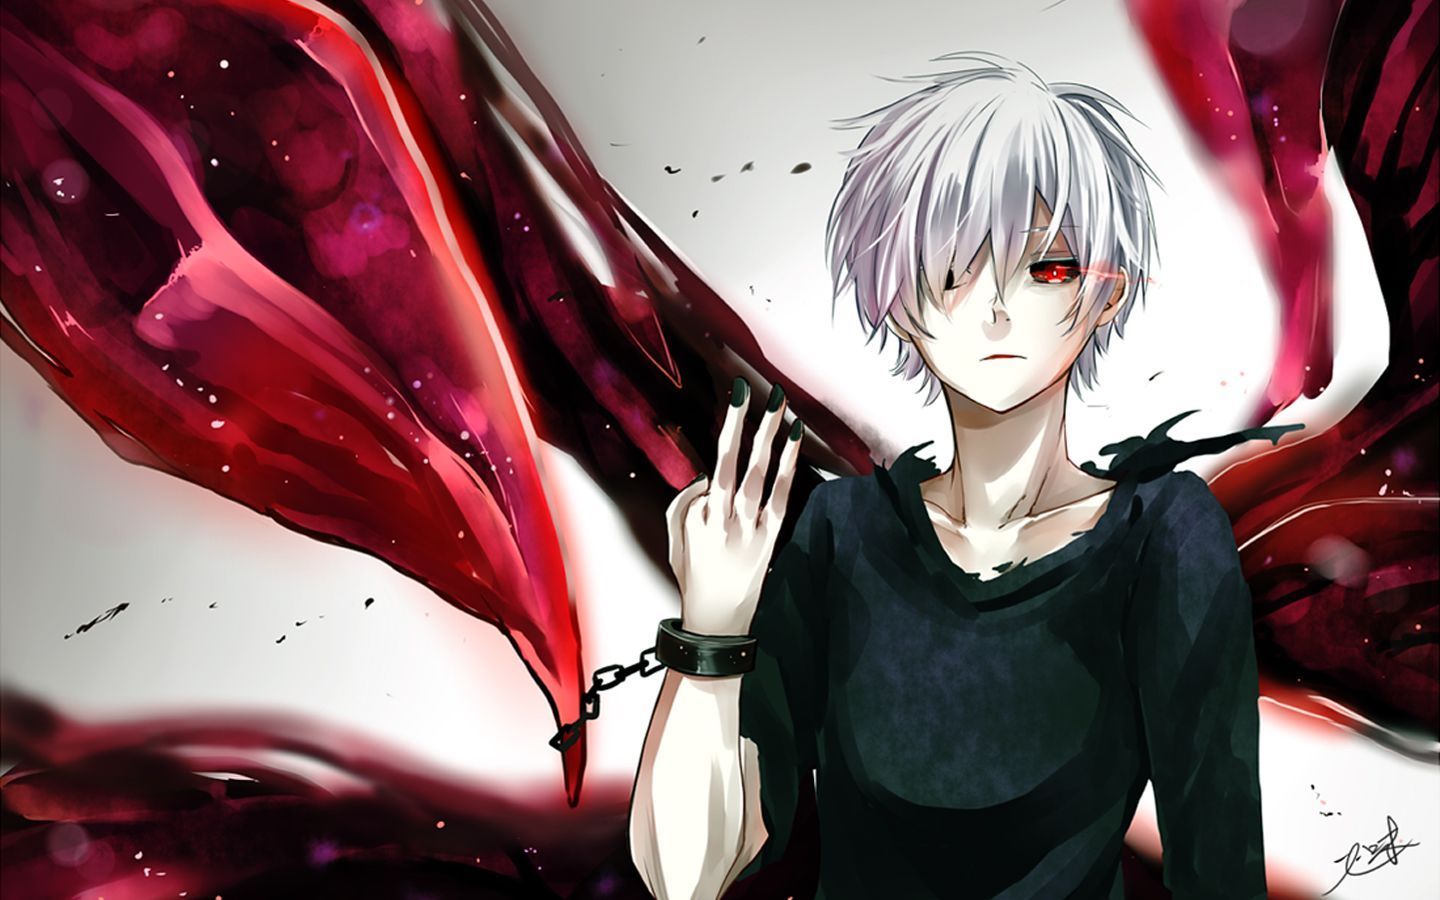 Tokyo Ghoul Kaneki Wallpapers for PC 1009 - HD Wallpapers Site